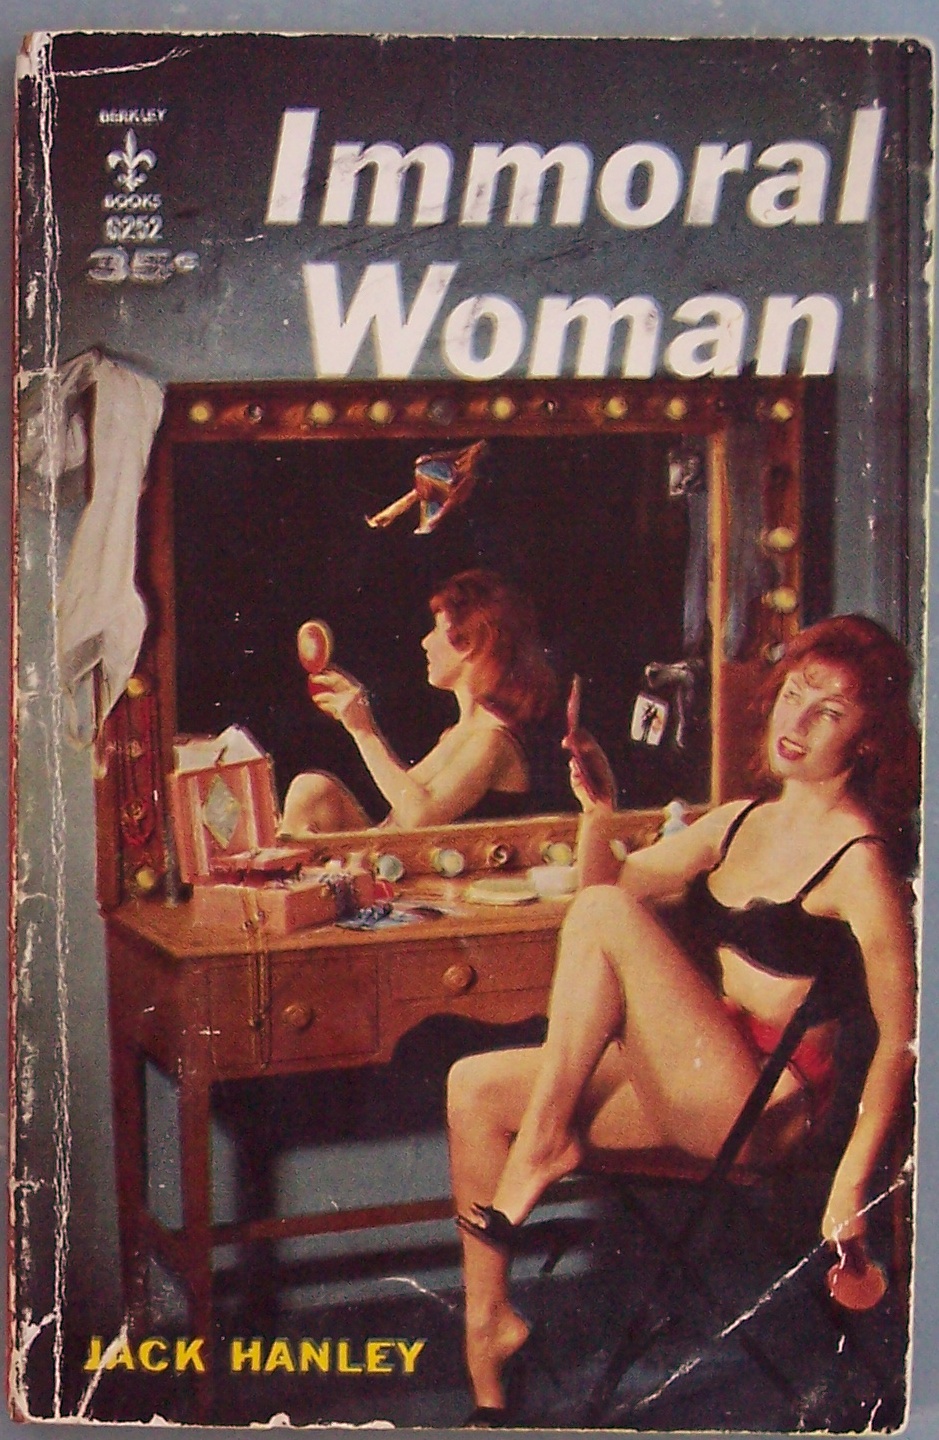 an old book cover shows a woman having her make - up done